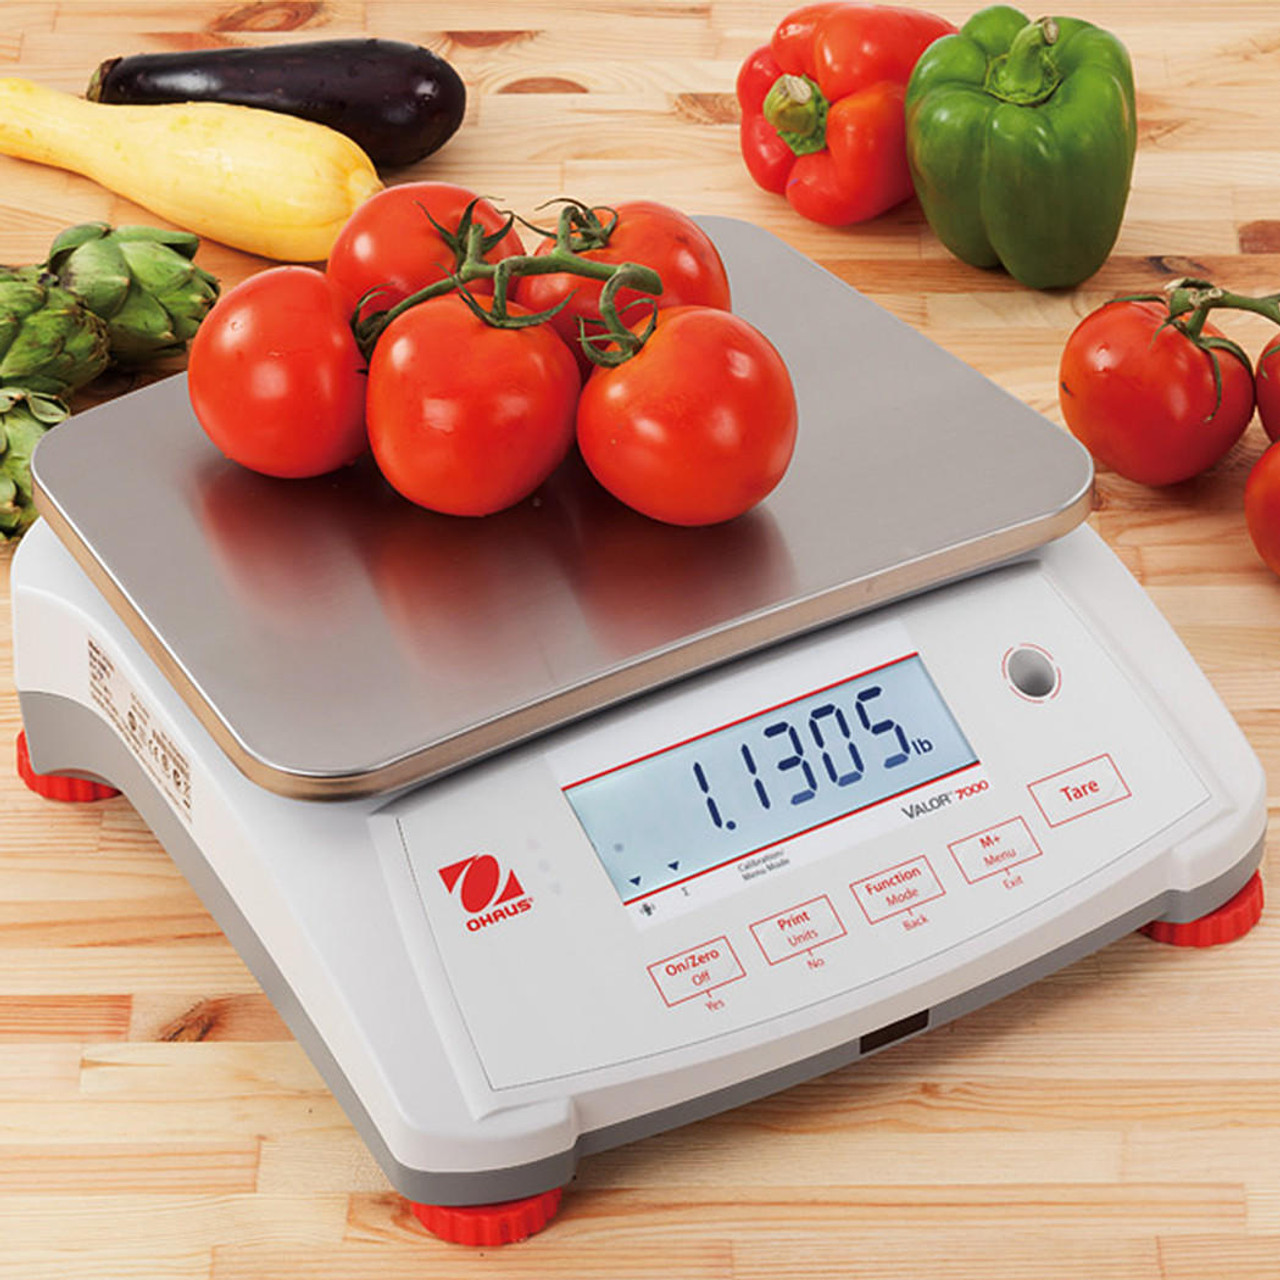 OHAUS Valor 7000 V71P1502T Bench Food Scale, 3 lb x .0001 lb, NTEP, Class  III